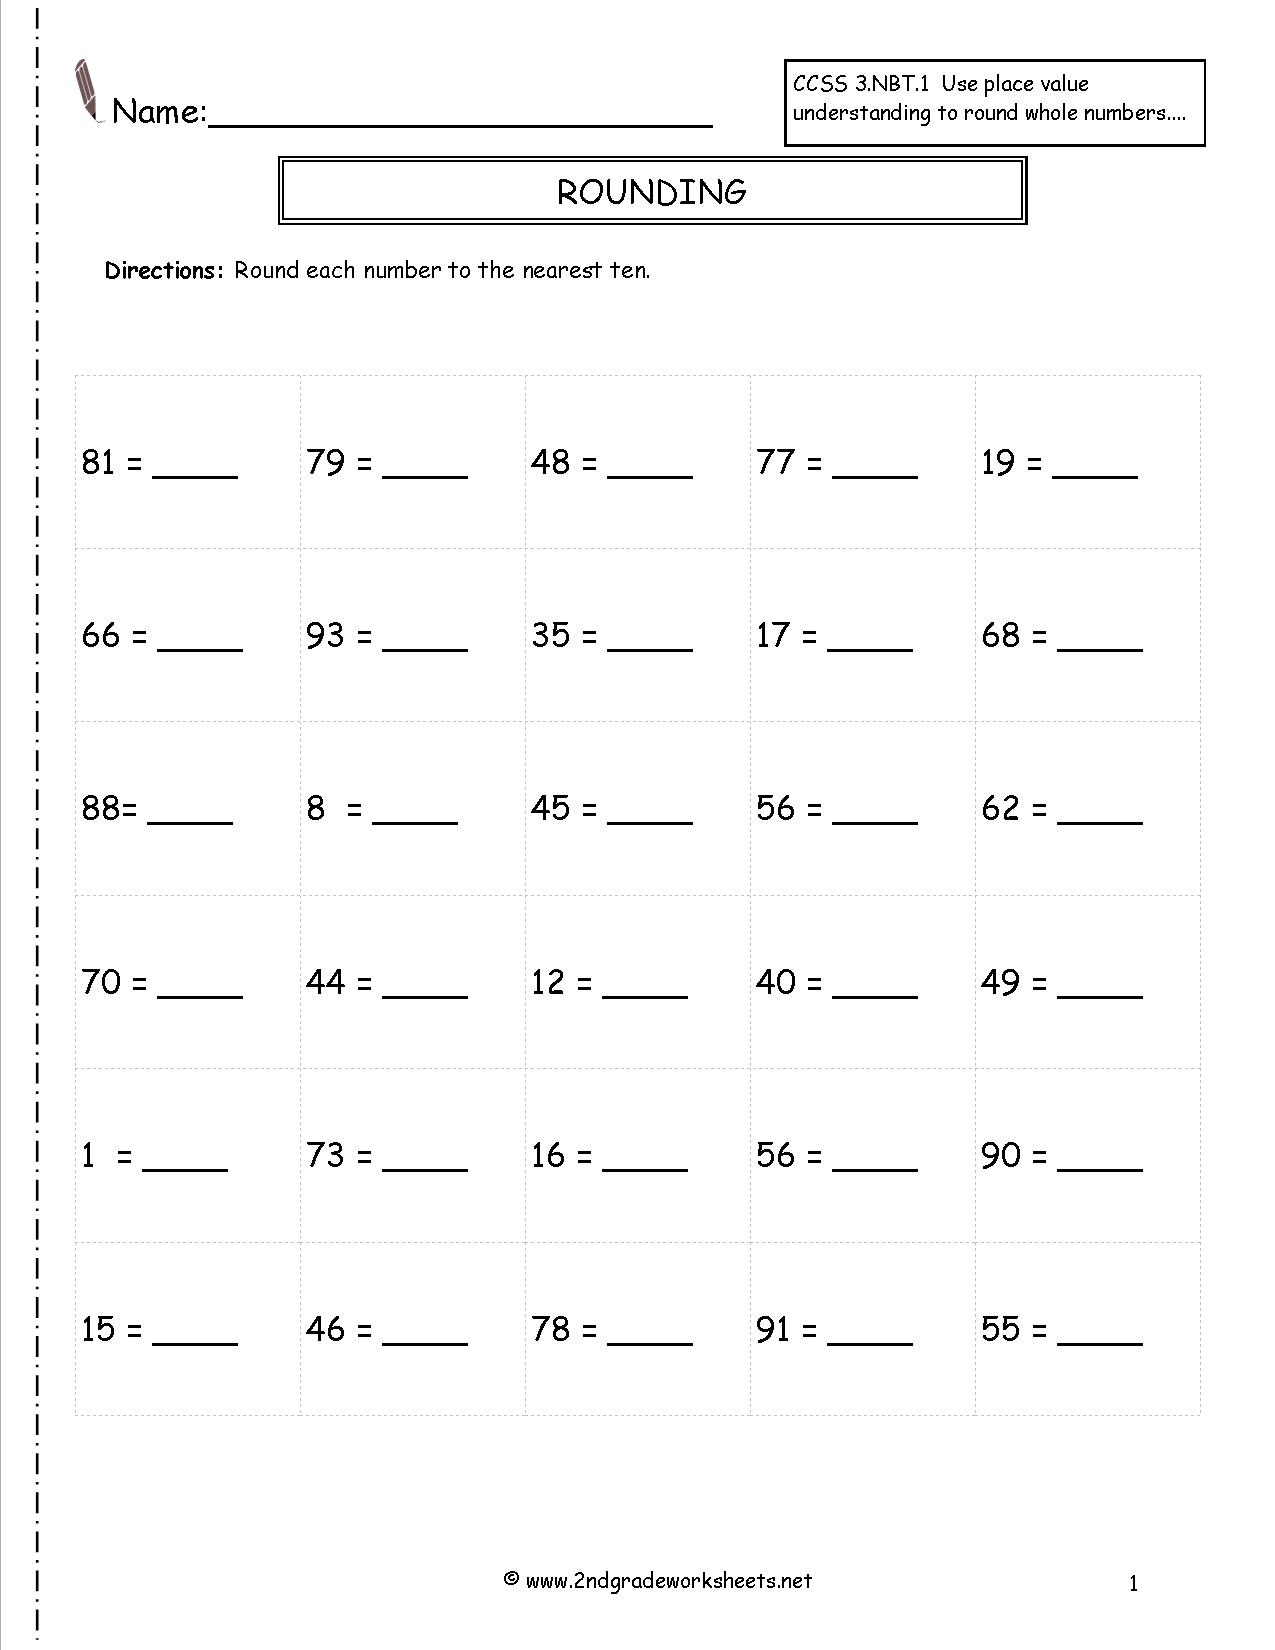 Rounding Whole Numbers Worksheets Printable Image